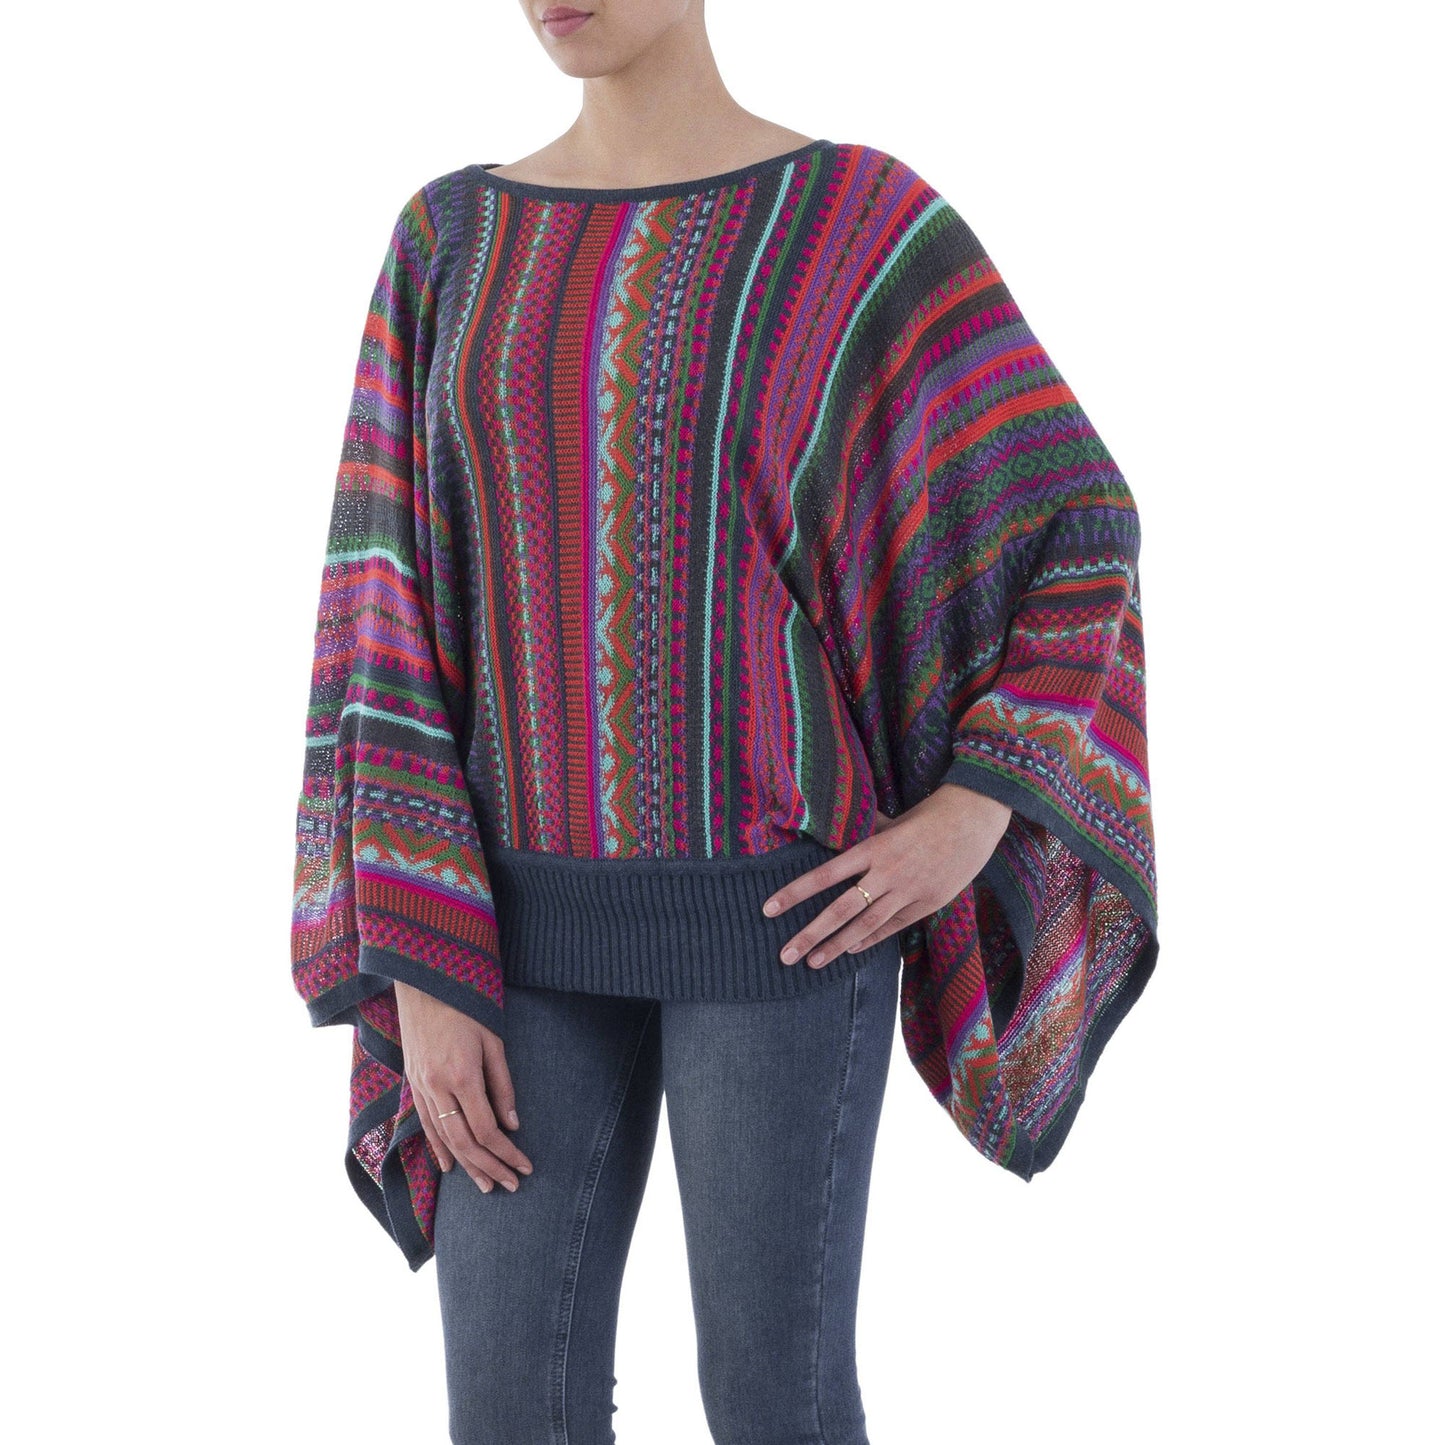 Fiesta of Color Striped Sweater